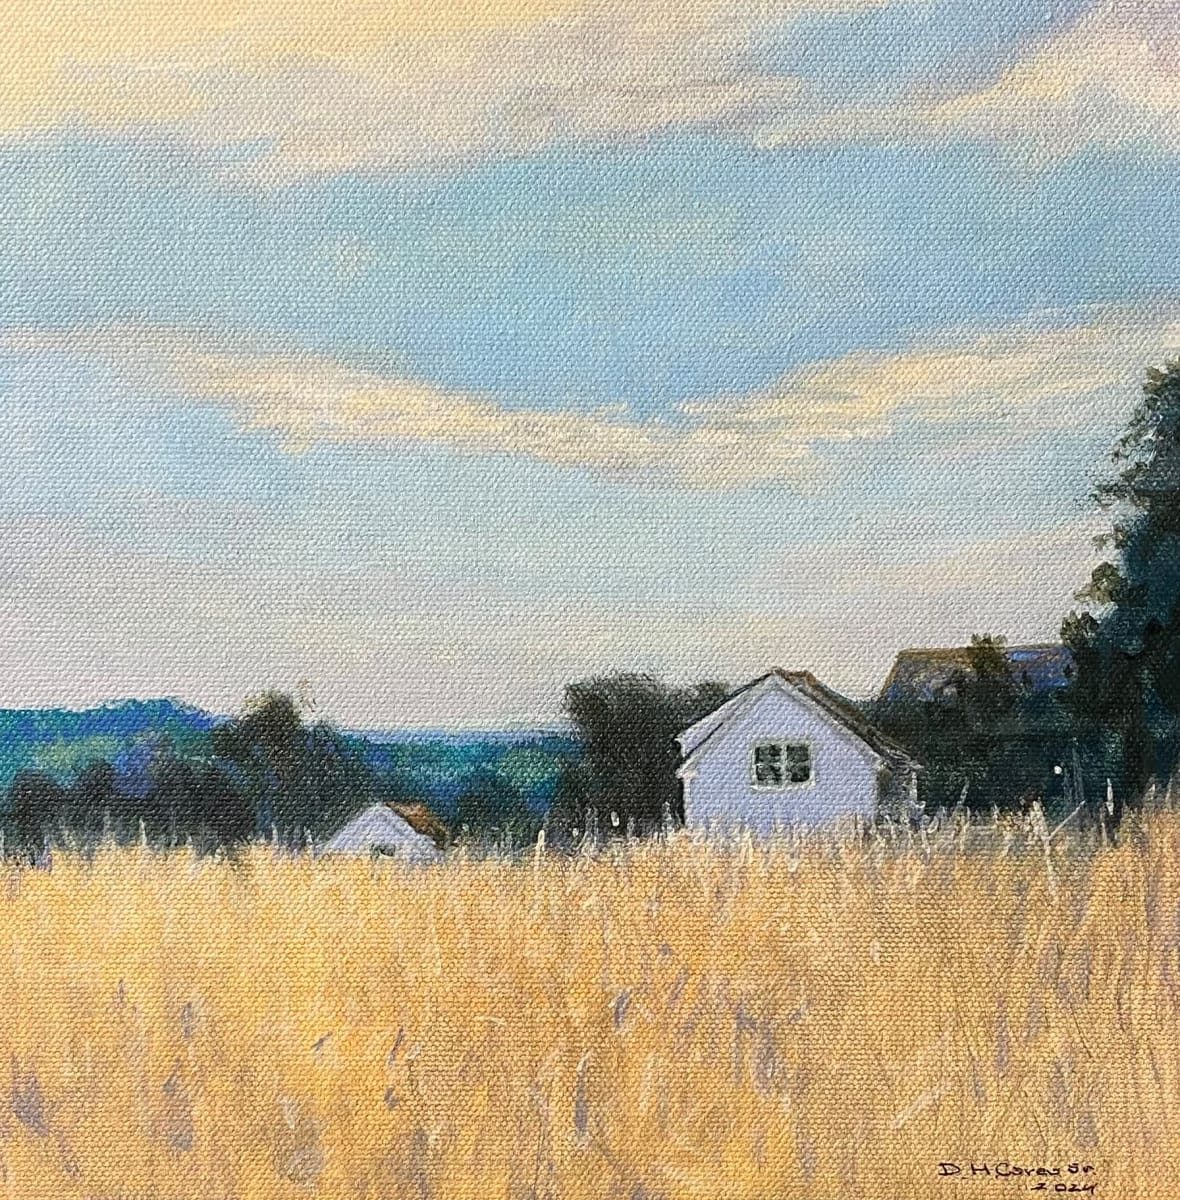 Farmhouses in a Field by Douglas H Caves Sr  Image: A painting of New England farmhouses in a field of tall hay at midday.